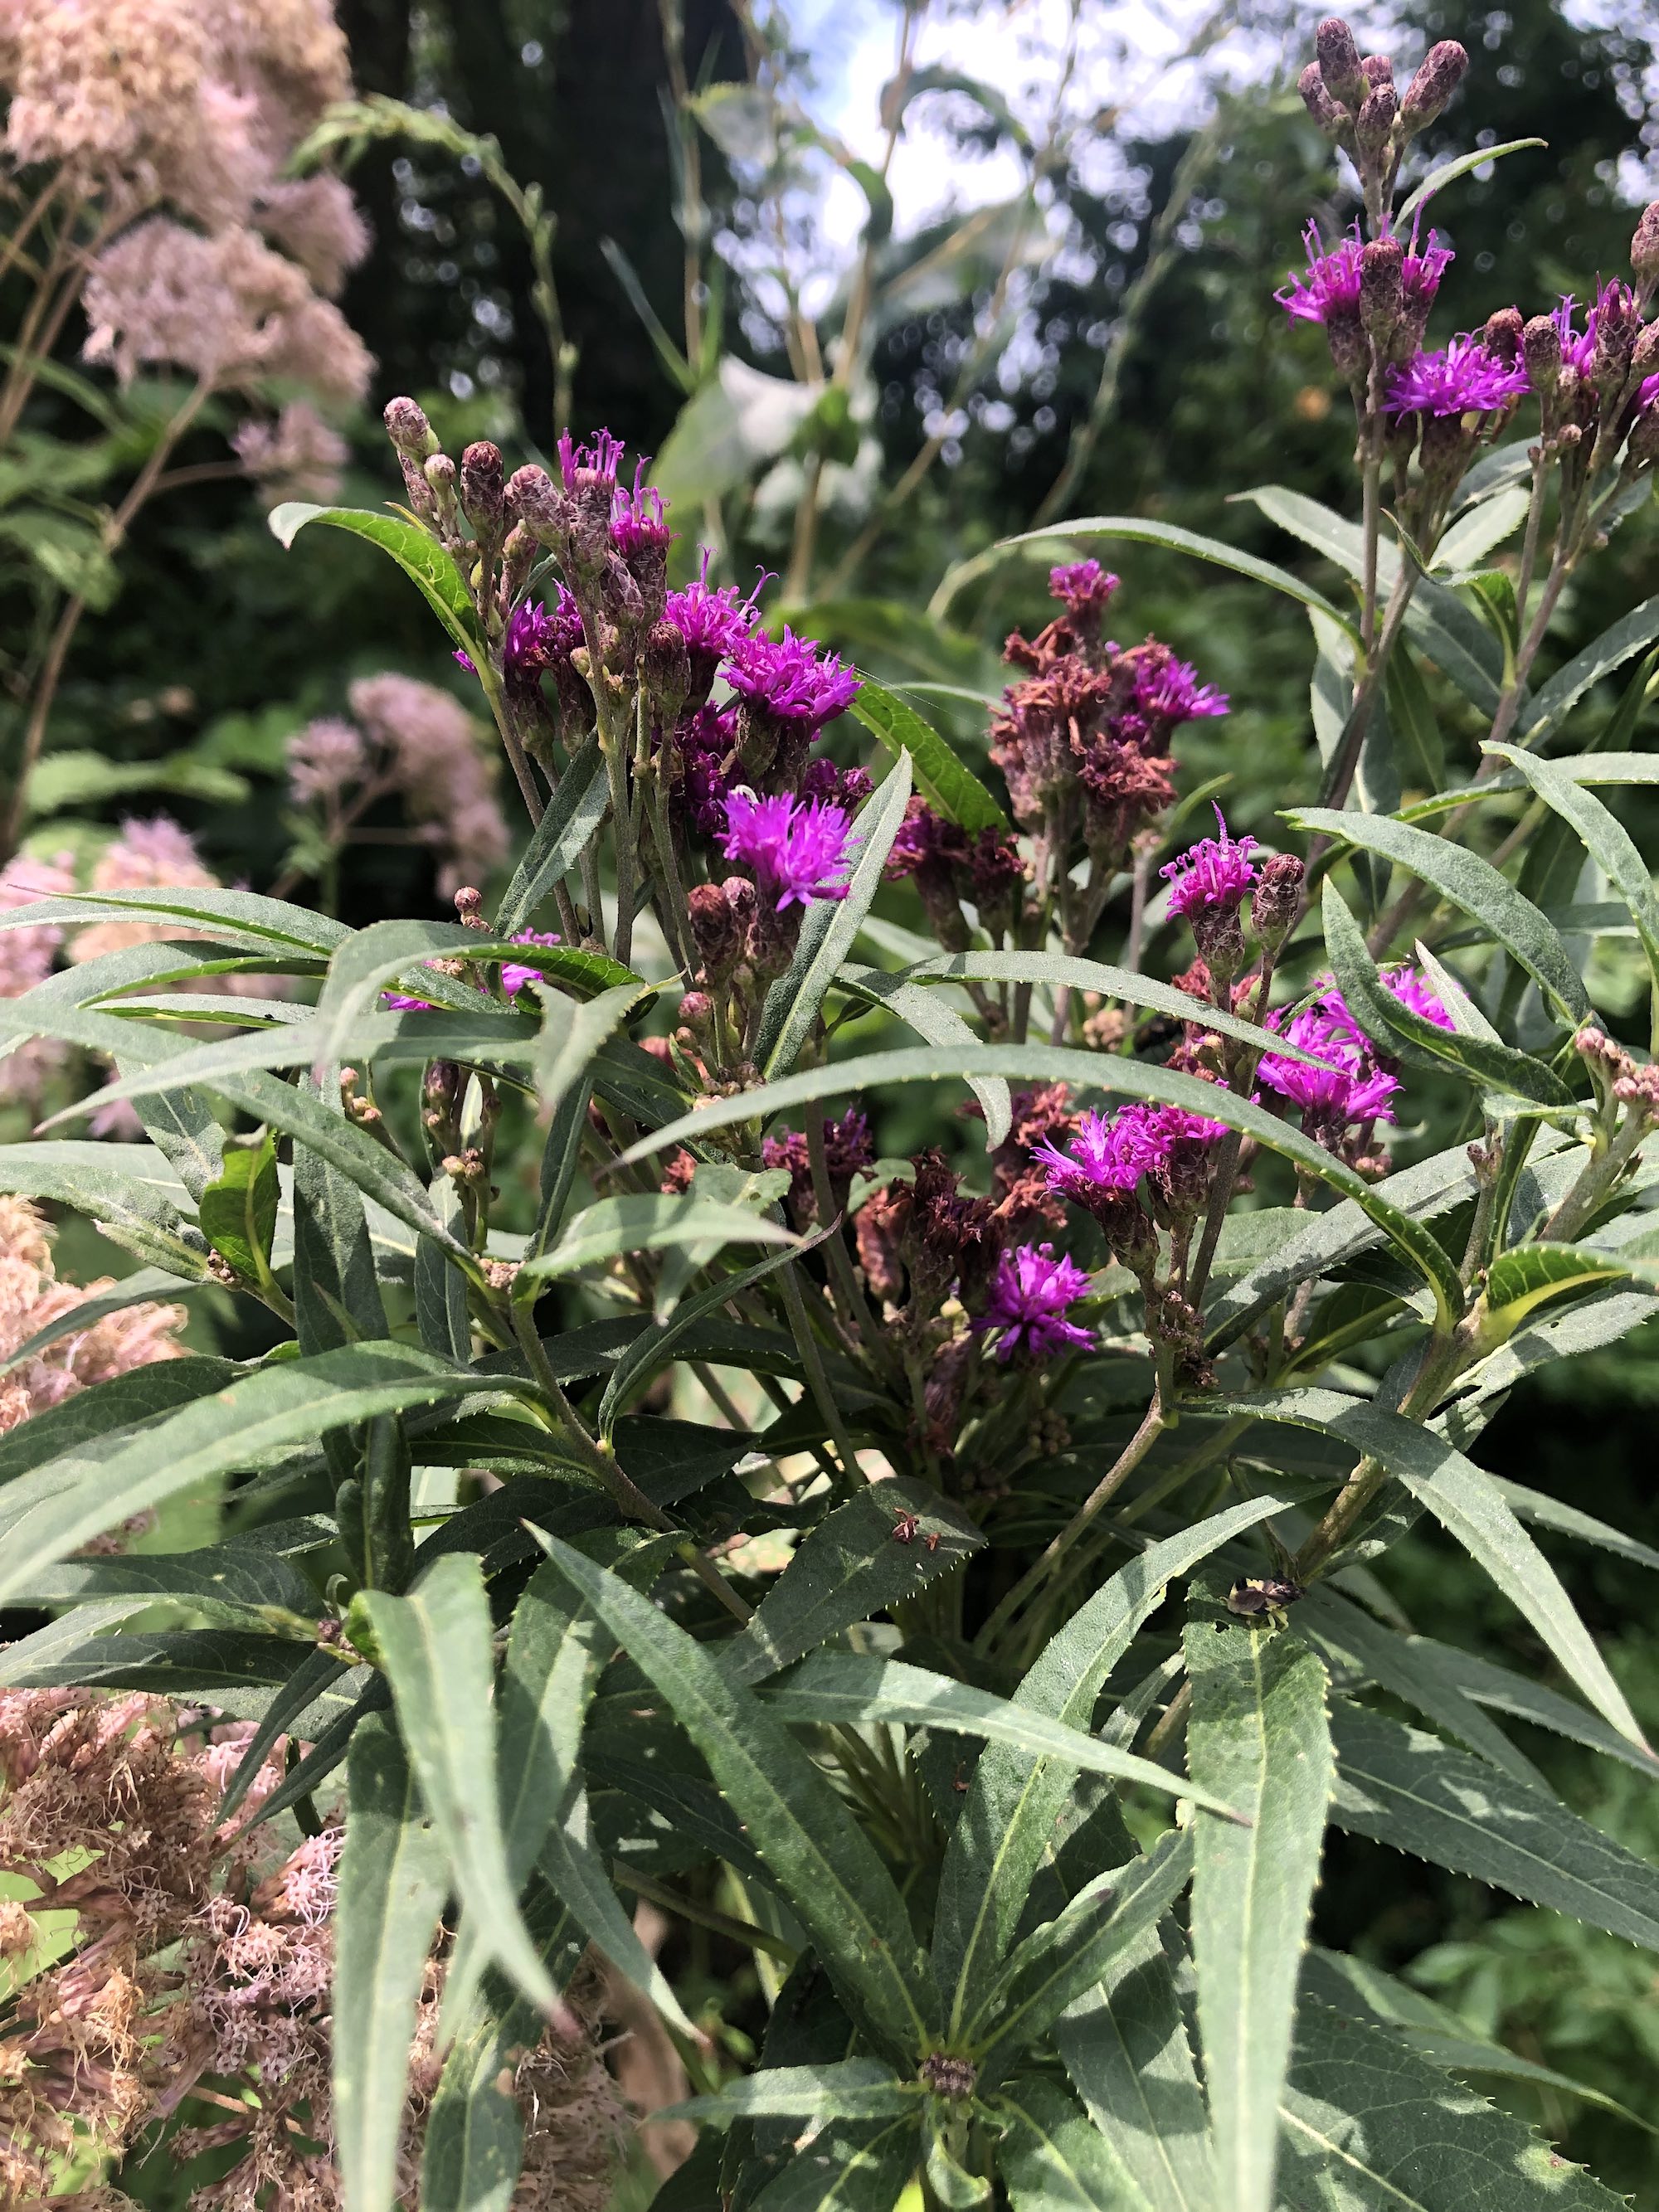 Common Ironweed along bikepath behind Gregory Street in Madison, Wisconsin on July 31, 2021.